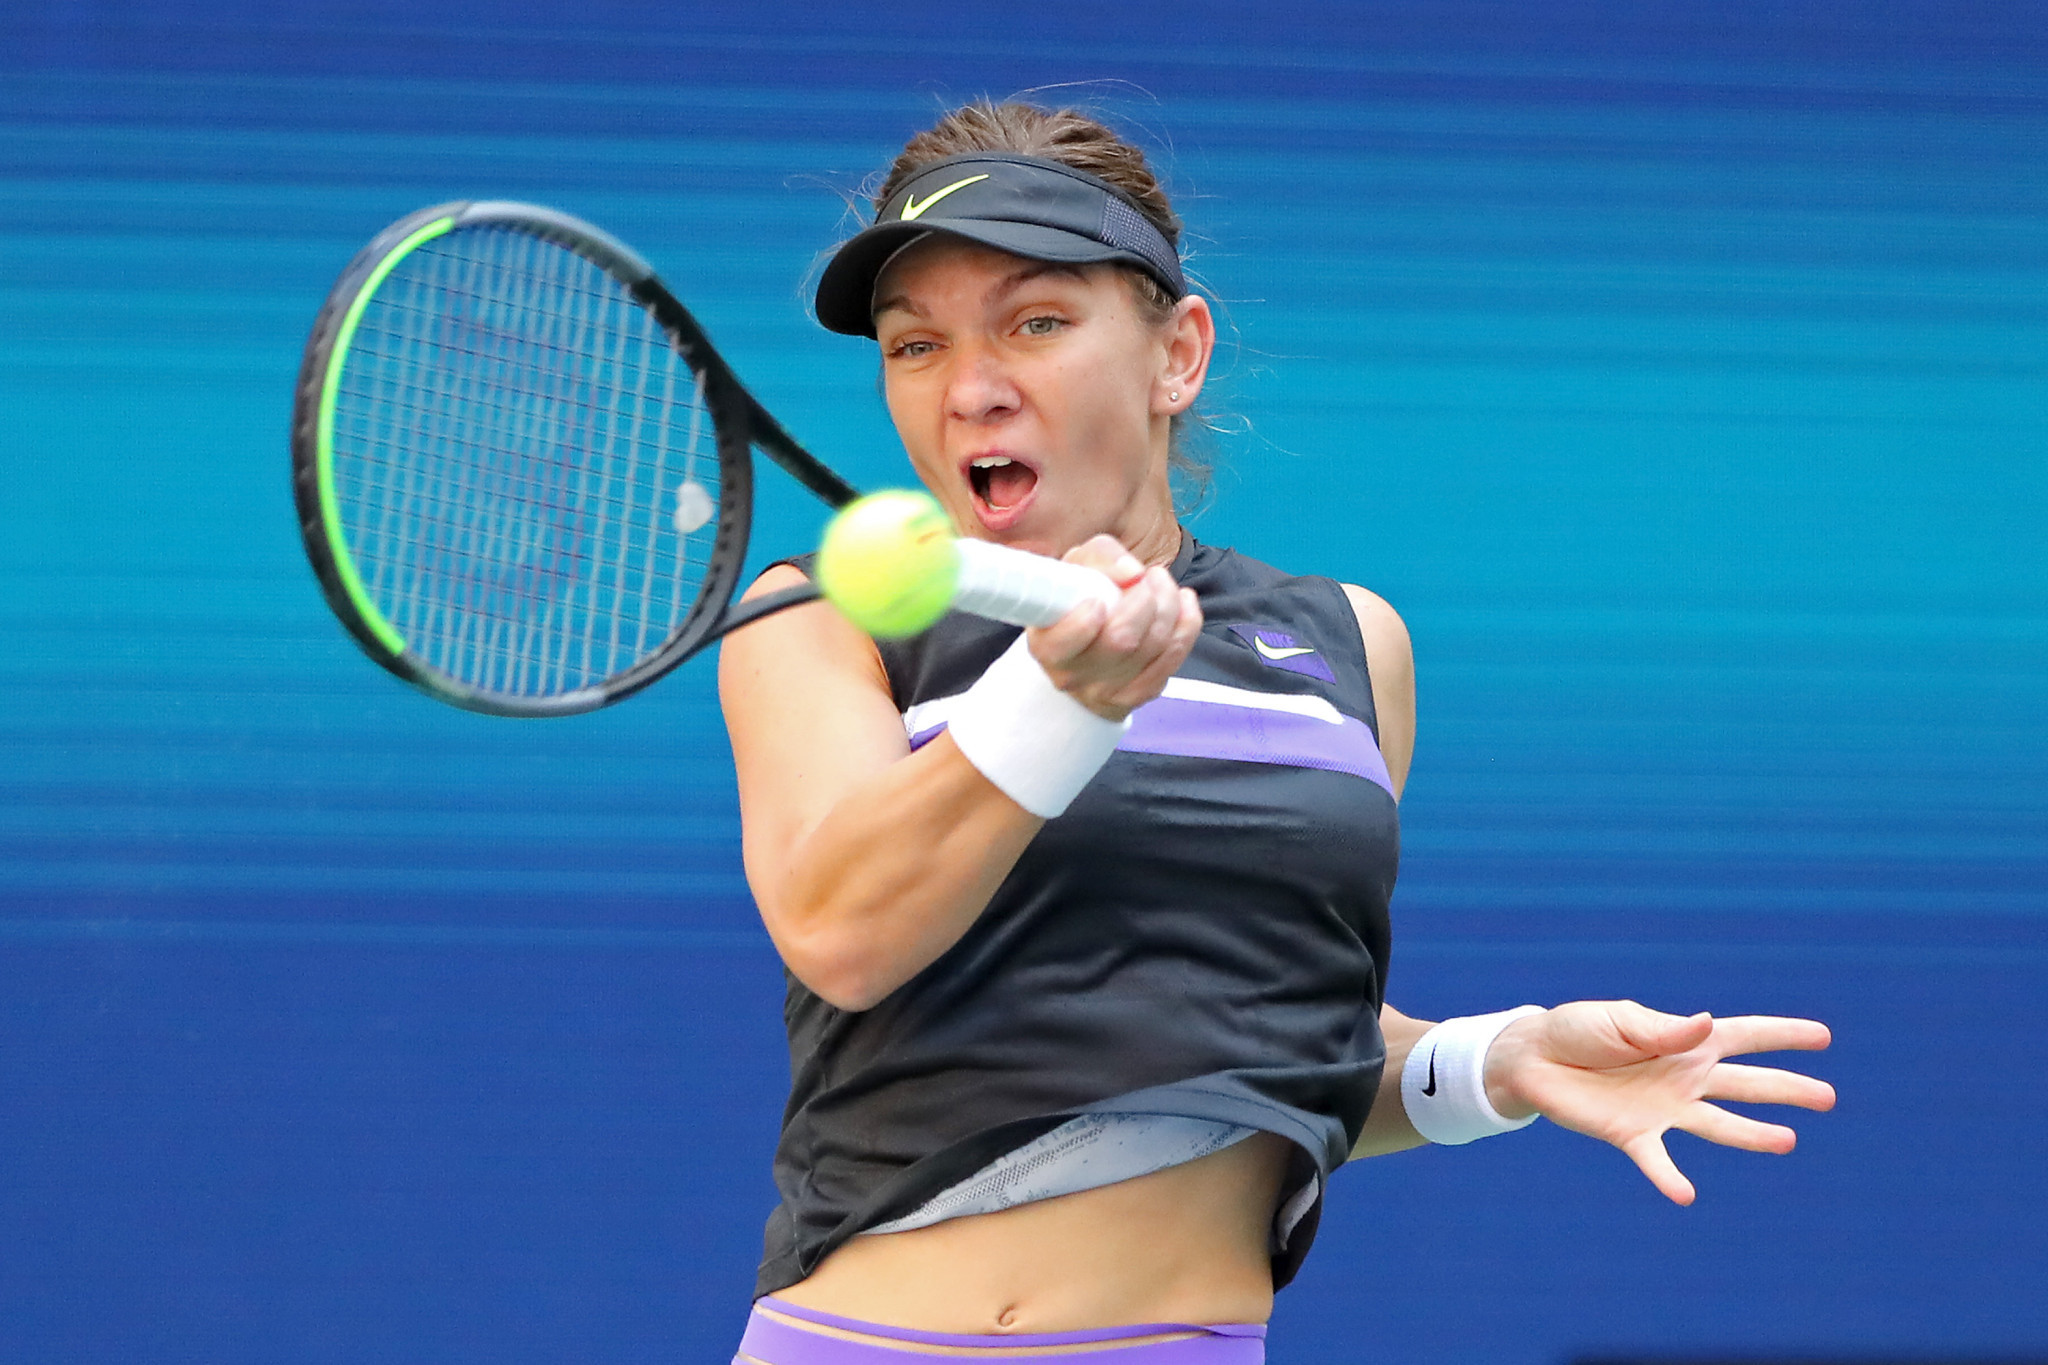 Romanian Simona Halep, the world number two, has pulled out of this year's US Open, saying health was "at the heart" of her decision ©Getty Images